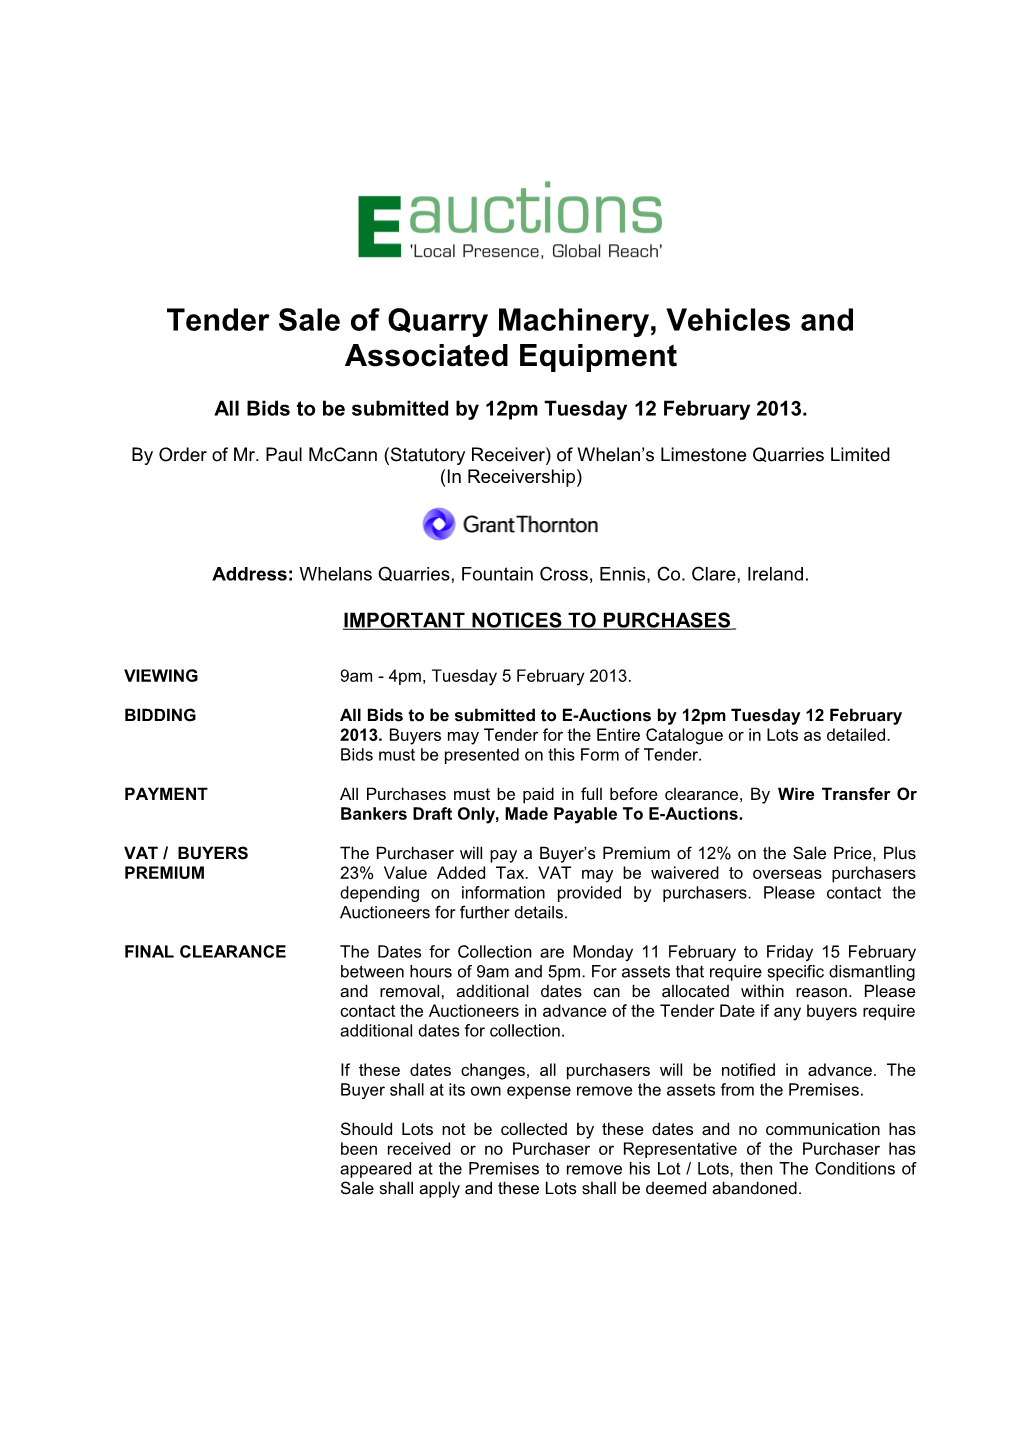 Tender Sale of Quarry Machinery, Vehicles and Associated Equipment